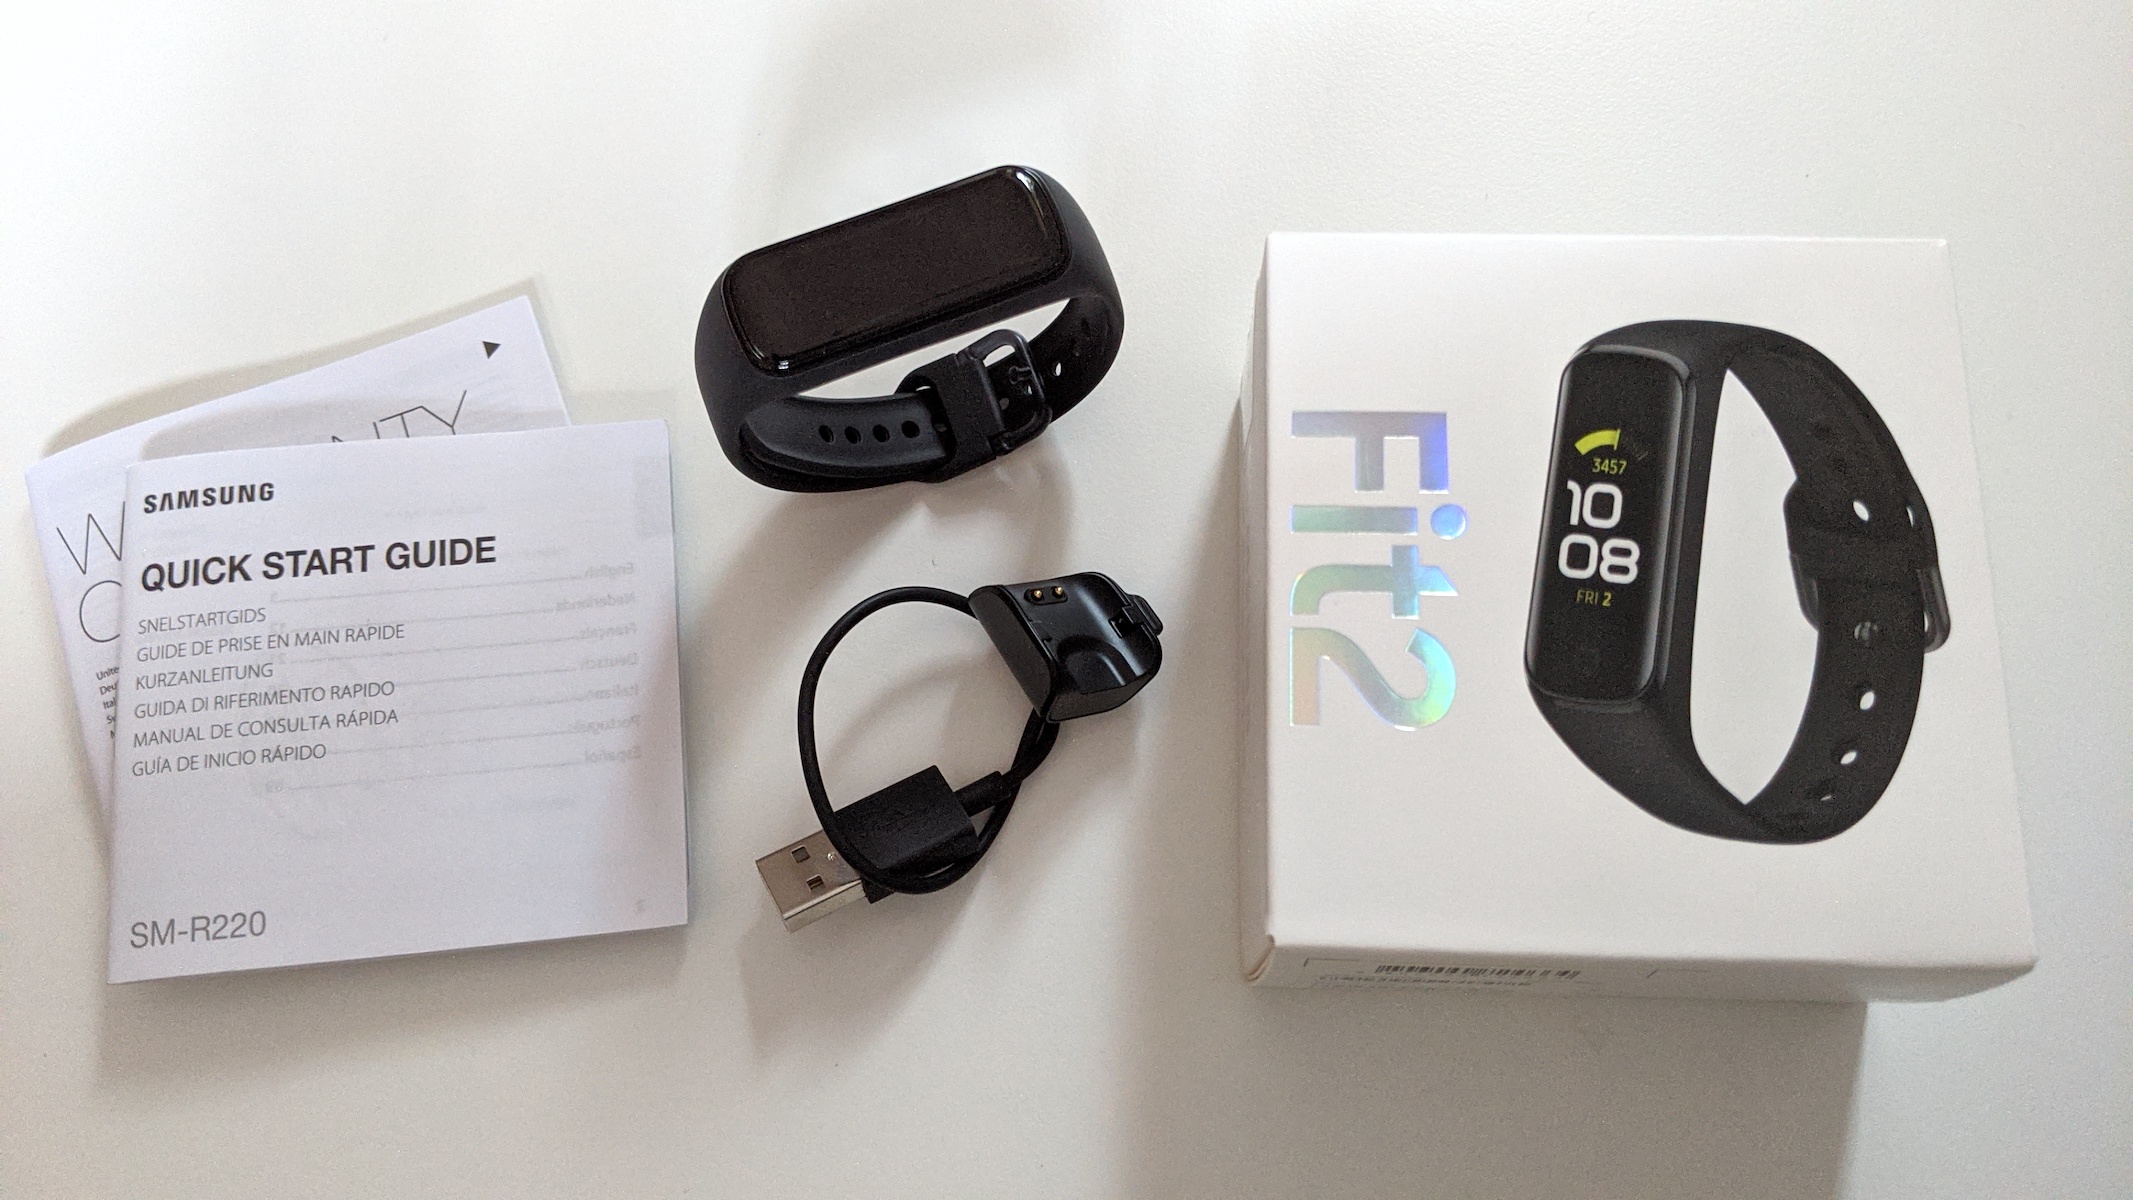 Samsung Galaxy Fit2 fitness tracker in review: Better than its predecessor and NotebookCheck.net Reviews